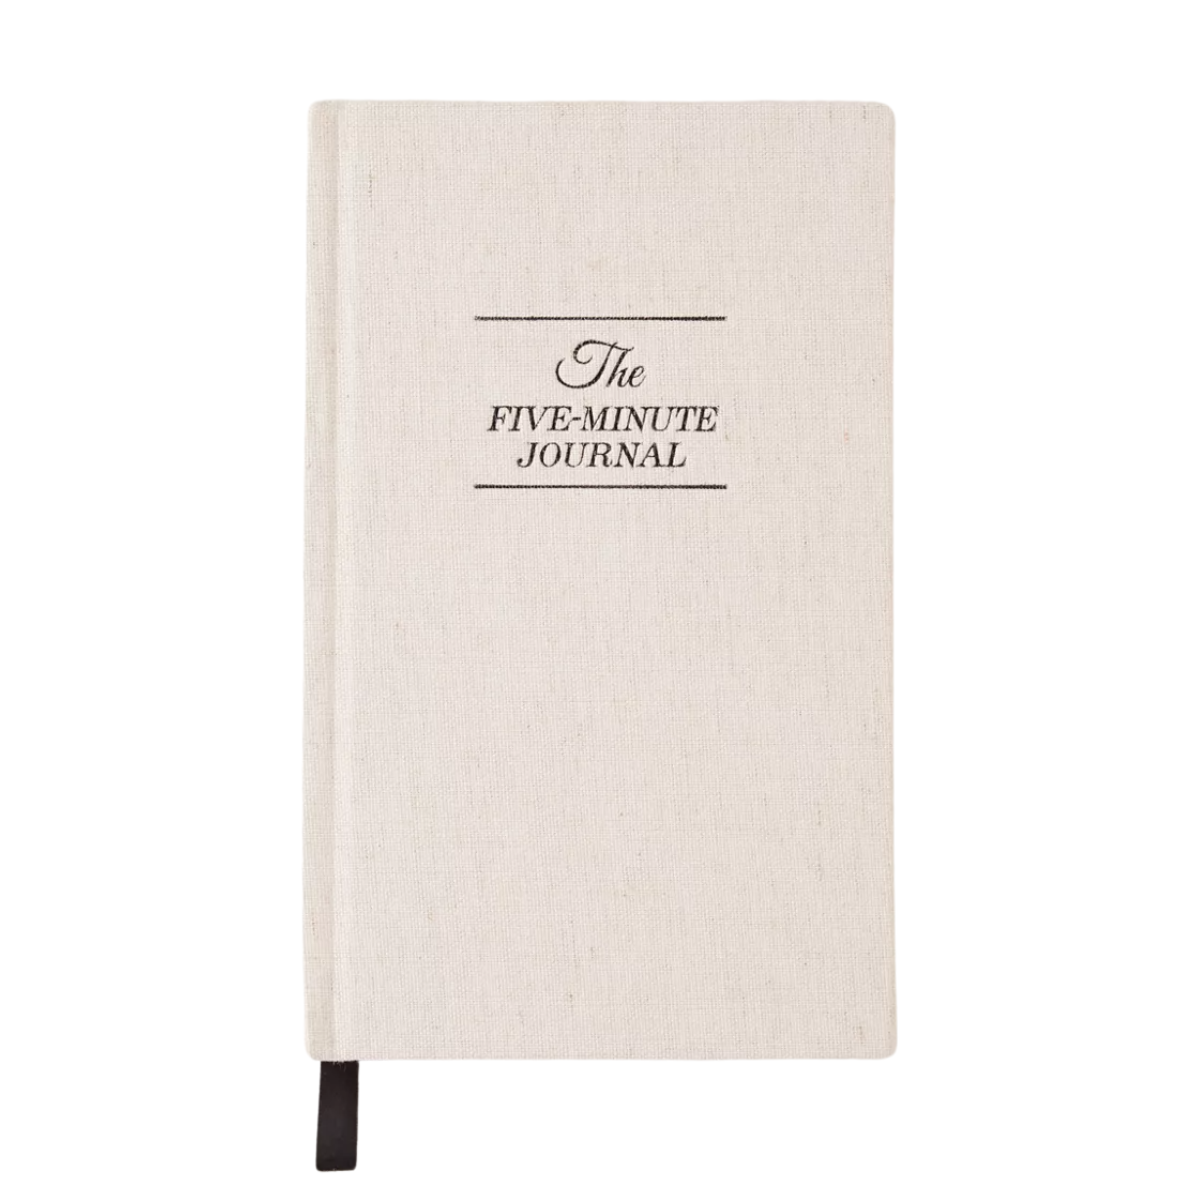 A gift that'll help them start off 2023 on a positive note, this Five Minute Journal will encourage them to take stock of the things they're grateful for each day, month, and year. $29, Amazon. <a href="https://www.amazon.com/Intelligent-Change-Mindfulness-Reflection-Affirmations/dp/0991846206">Get it now!</a>